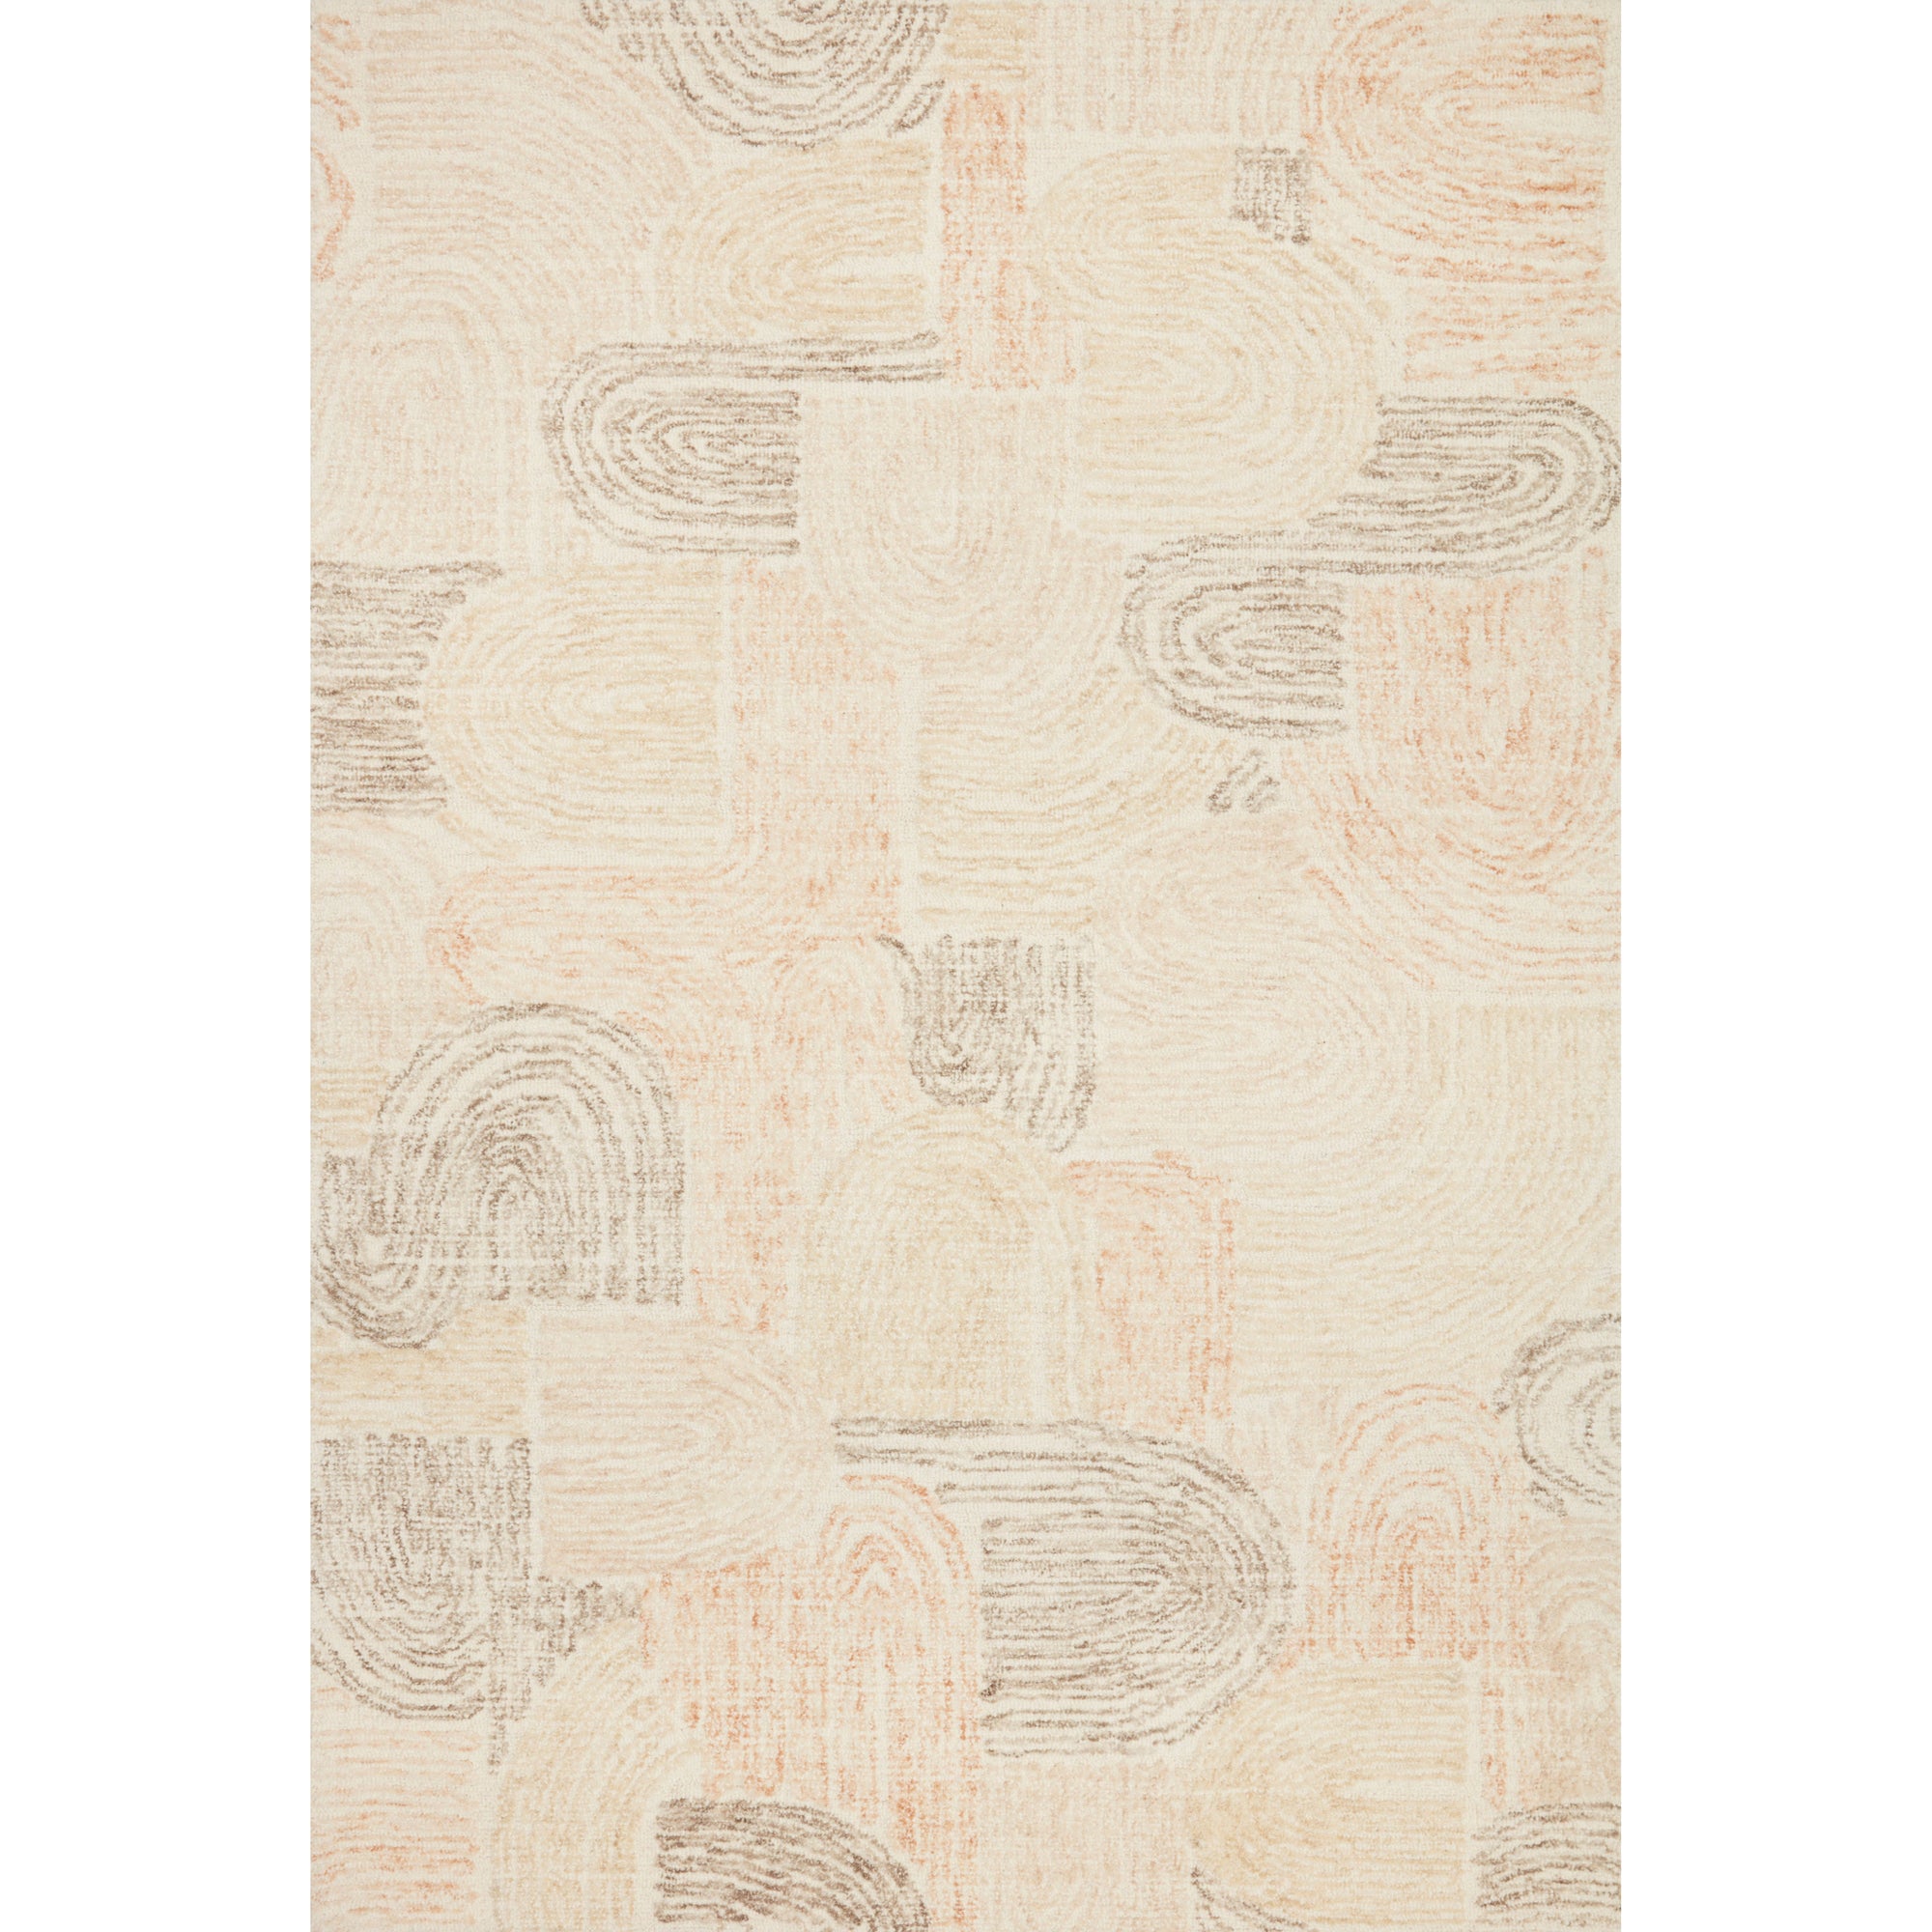 Rugs by Roo Loloi Milo Peach Pebble Area Rug in size 18" x 18" Sample